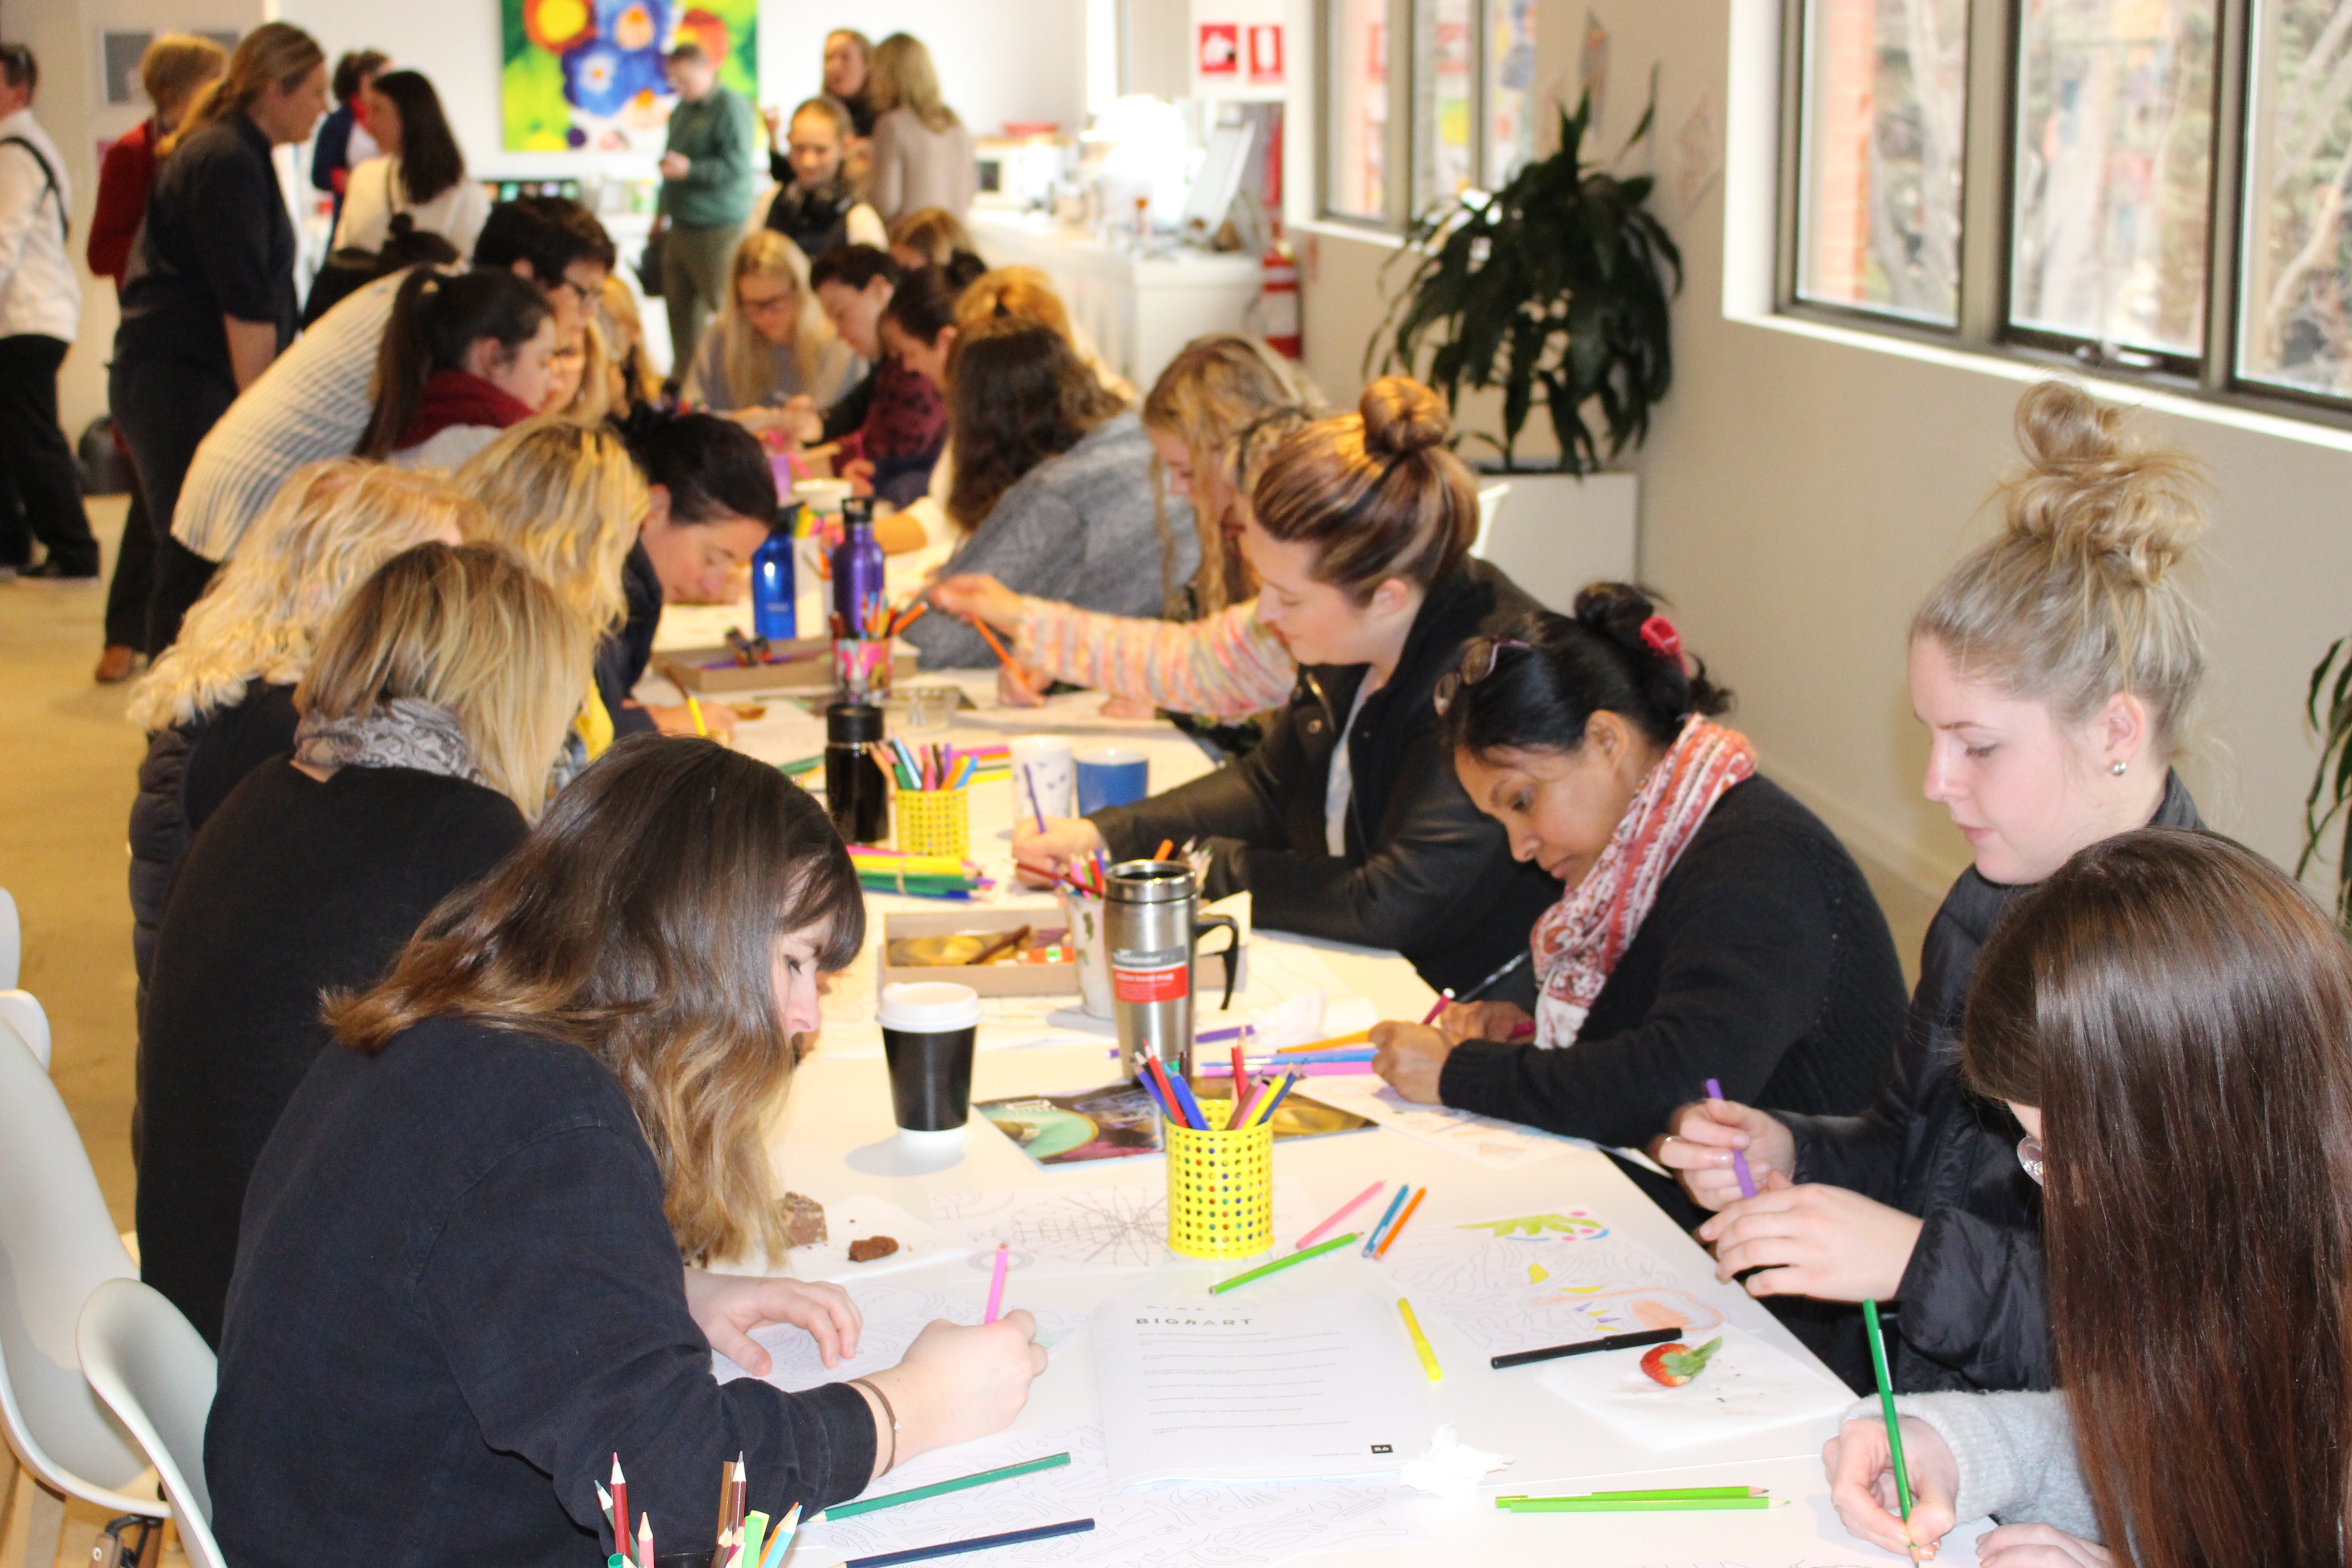 Colouring for change in Cooma, lead by local teens